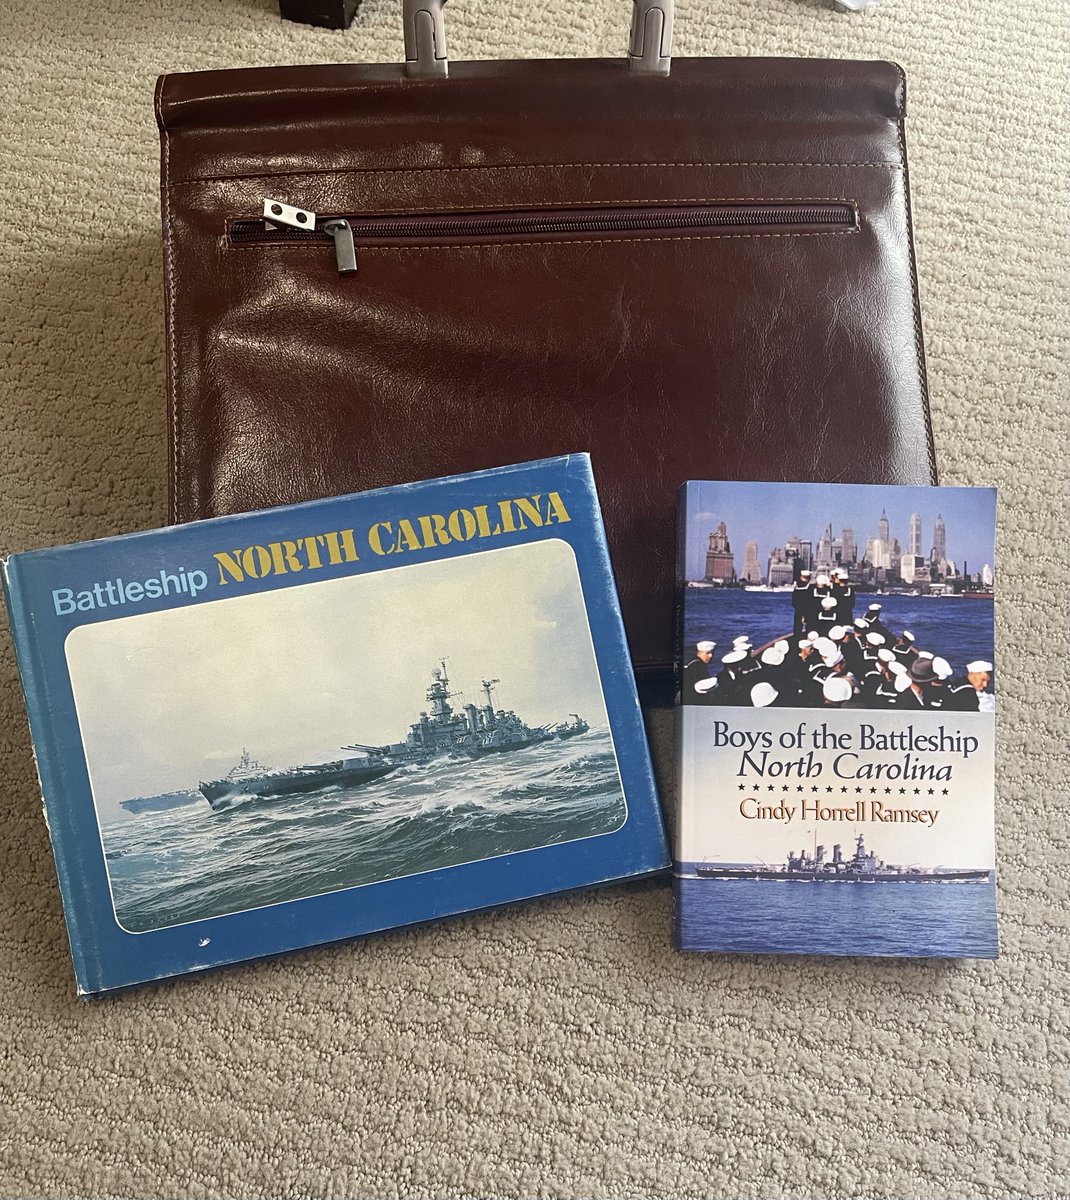 Two new books with seas stories of USS North Carolina (BB 55) Finally reading non-technical books on #BB55. Always good snippets in personal stories Left: Capt. Ben Blee, USN, Ret. (WWII crewmember) Right: Cindy H. Ramsey a.co/d/eTbMZ8b #USSNorthCarolina